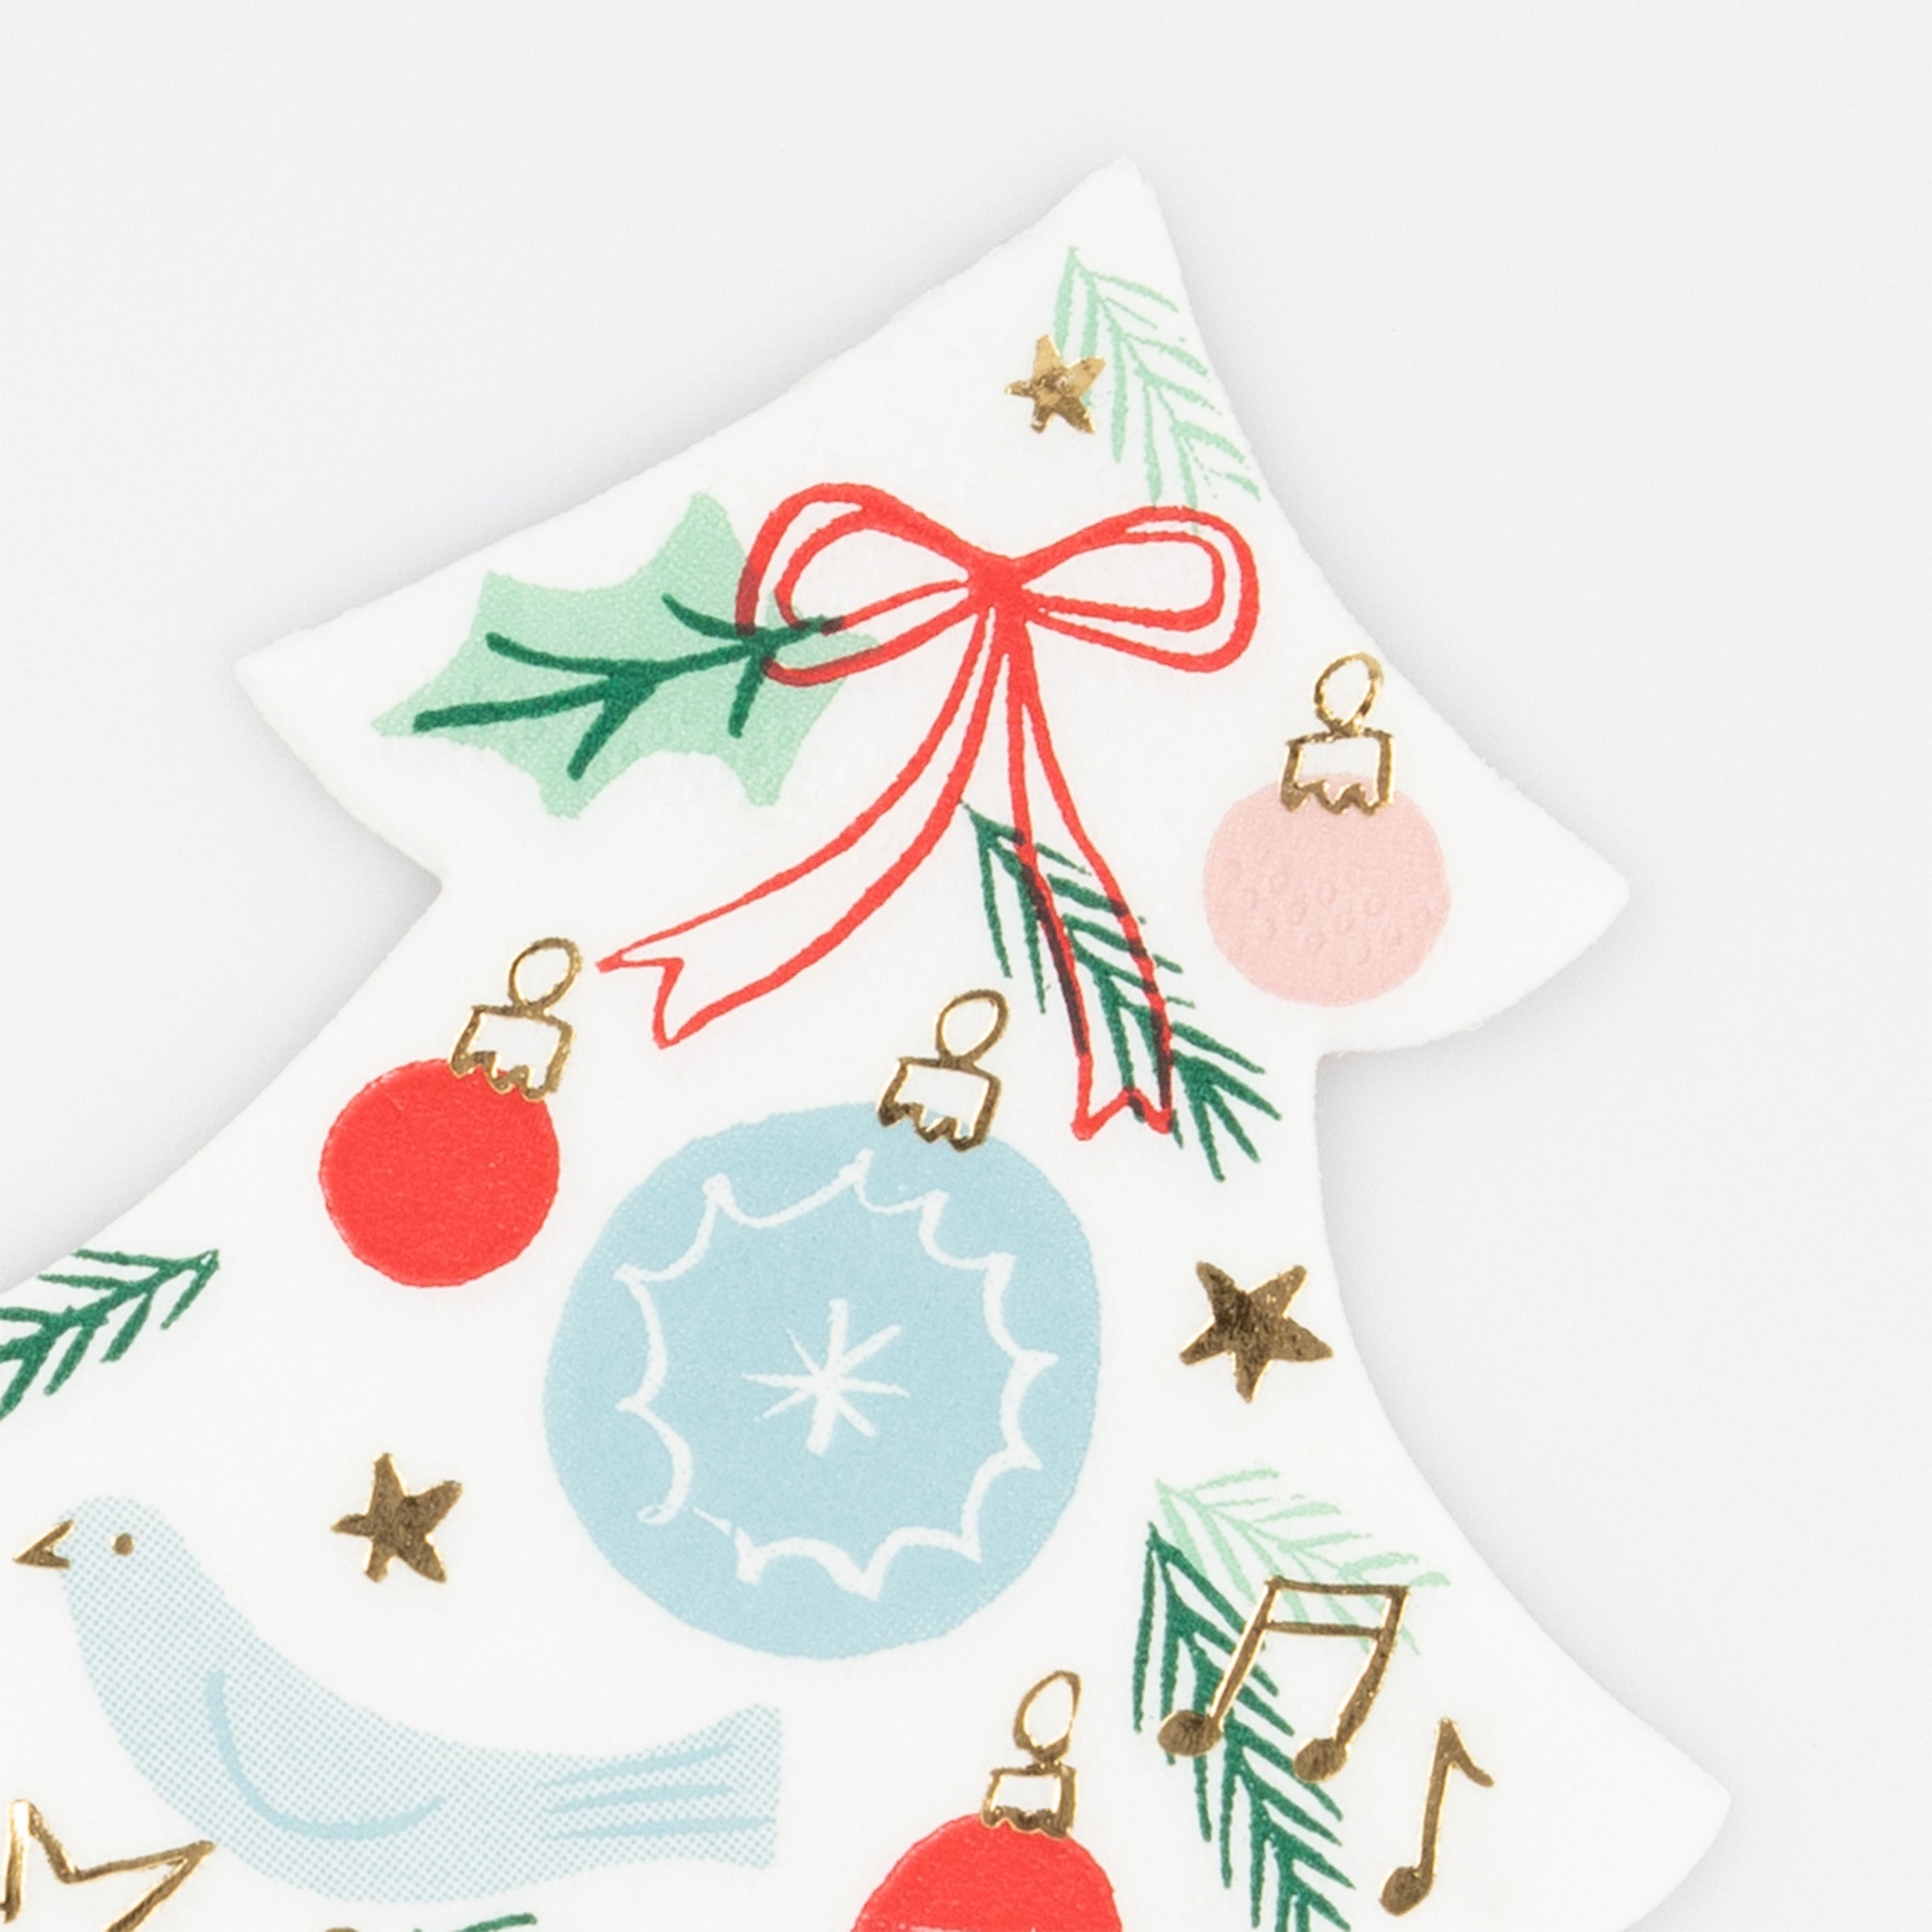 Our Christmas tree napkins will look amazing as Christmas party table decorations.